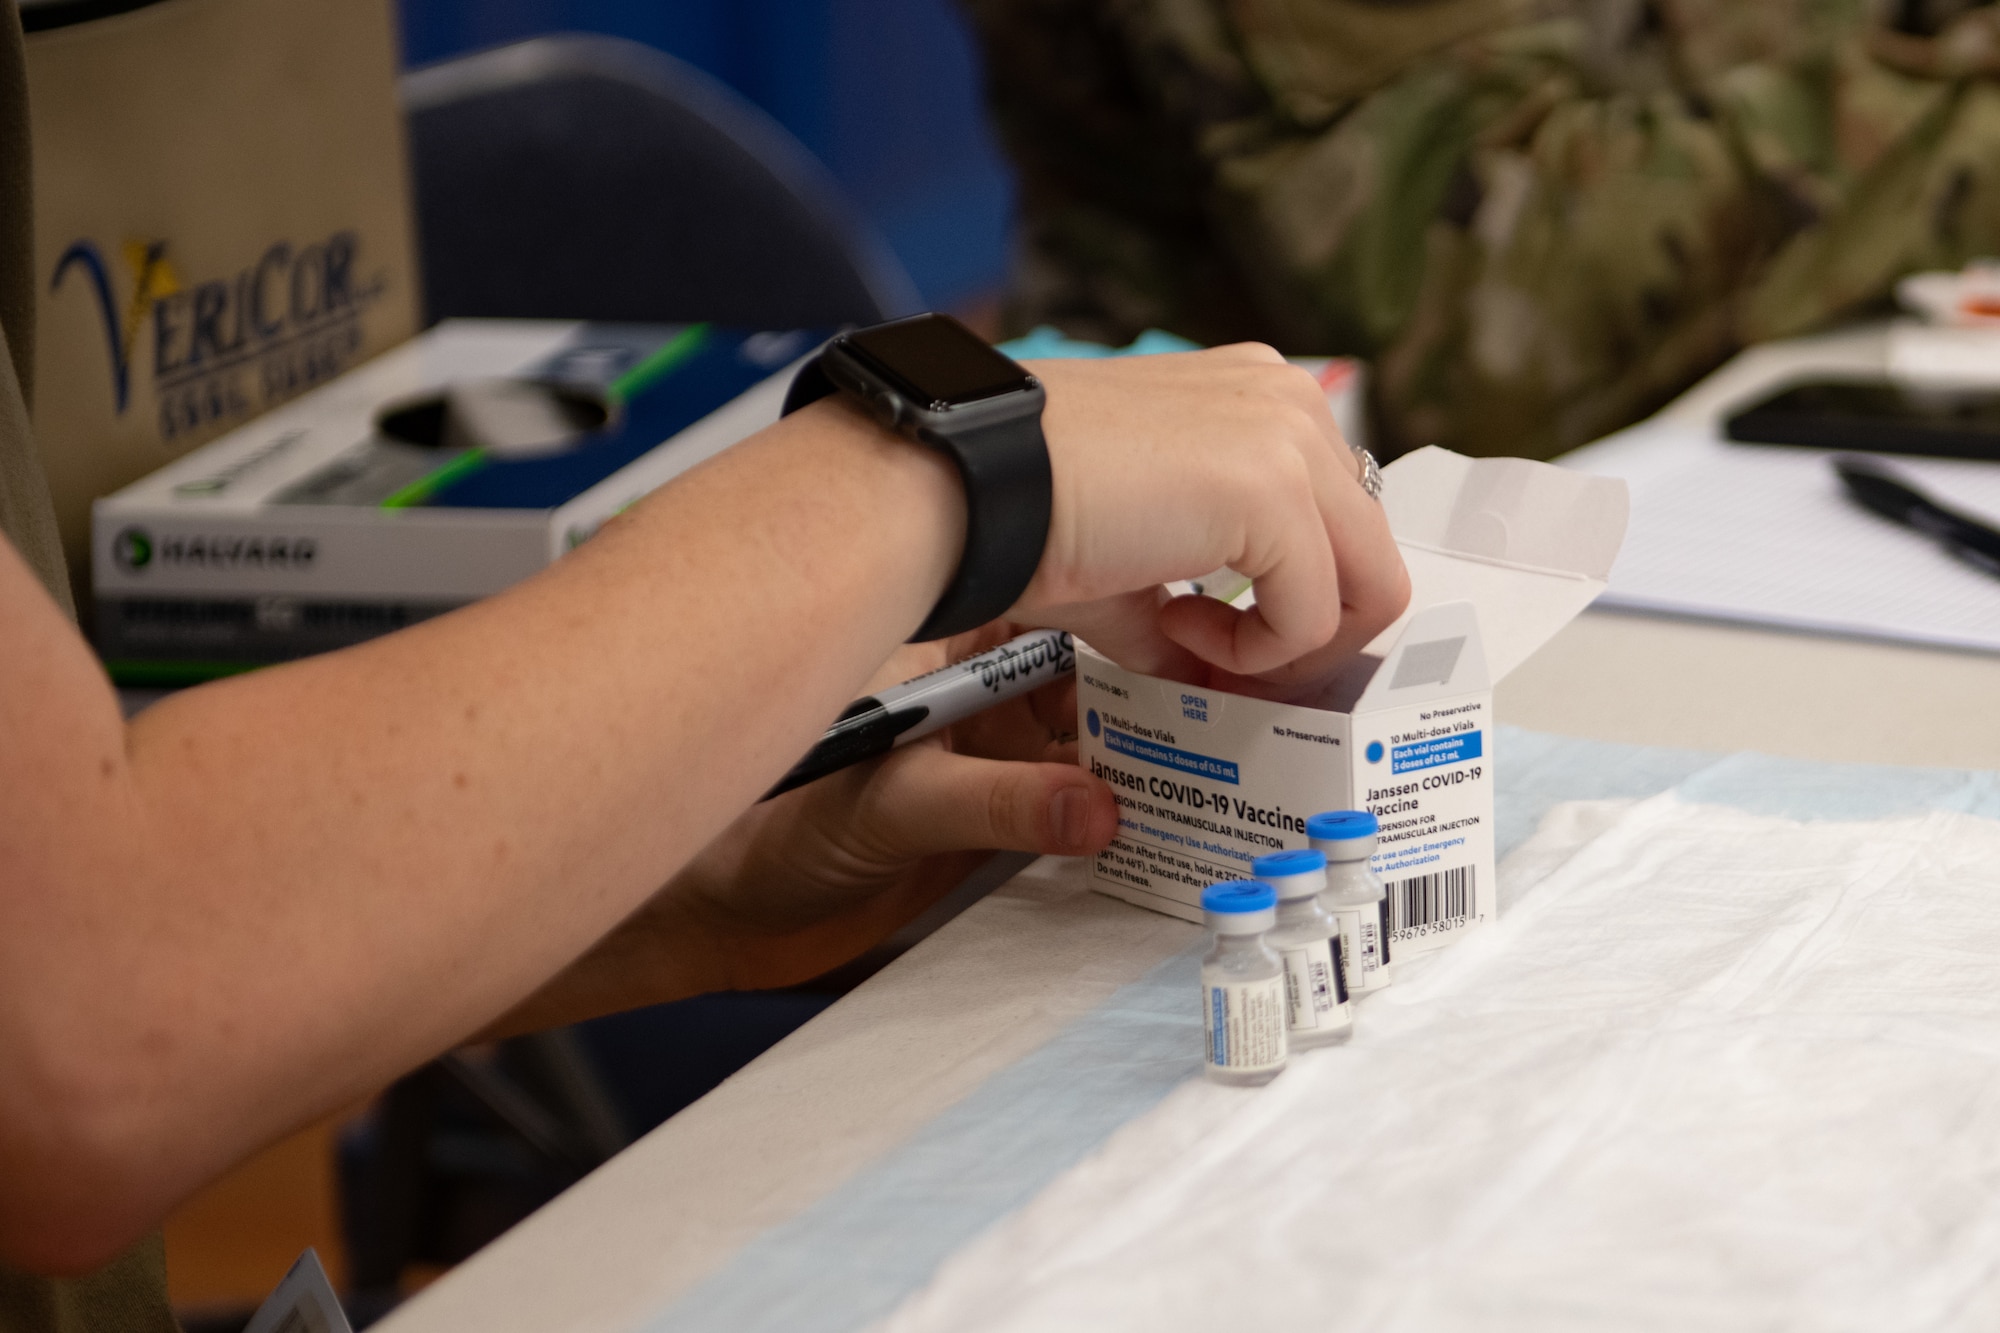 A U.S. Airman from the 18th Medical Group numbers vials of the Janssen COVID-19 vaccine.